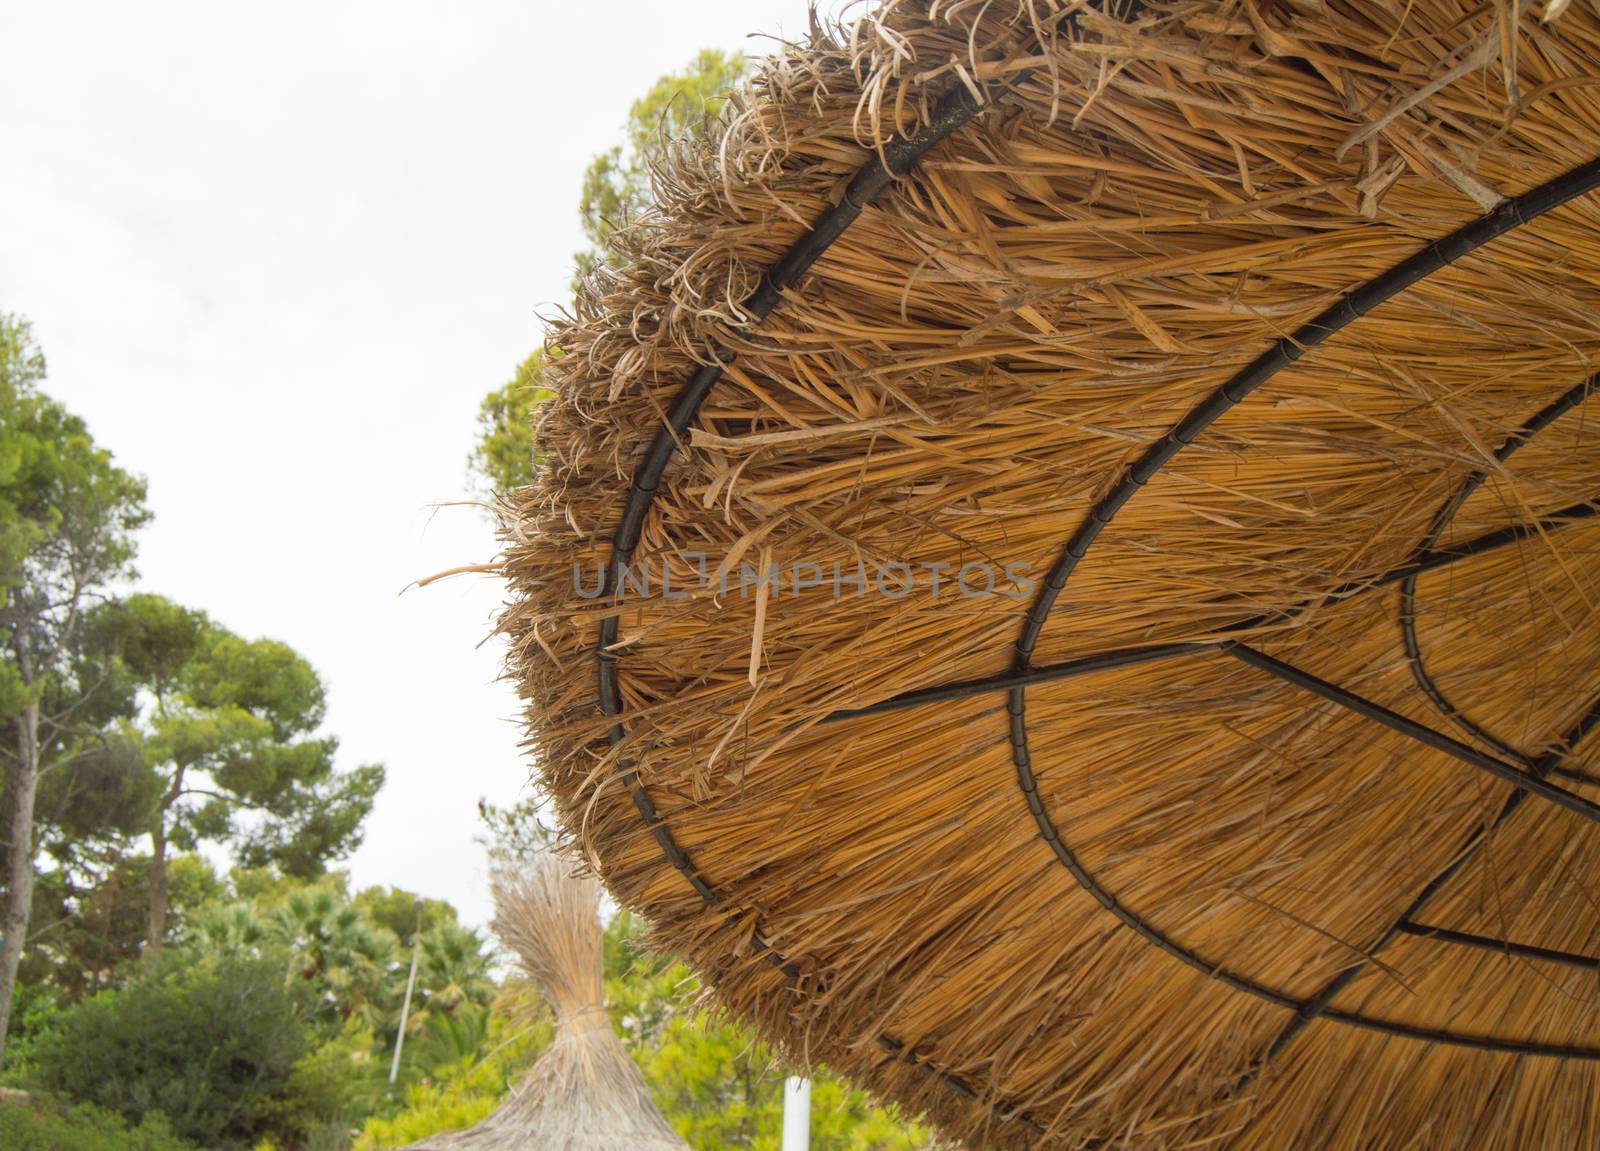 Straw umbrellas on the beach in Palma de Mallorca, Close-up against trees by claire_lucia